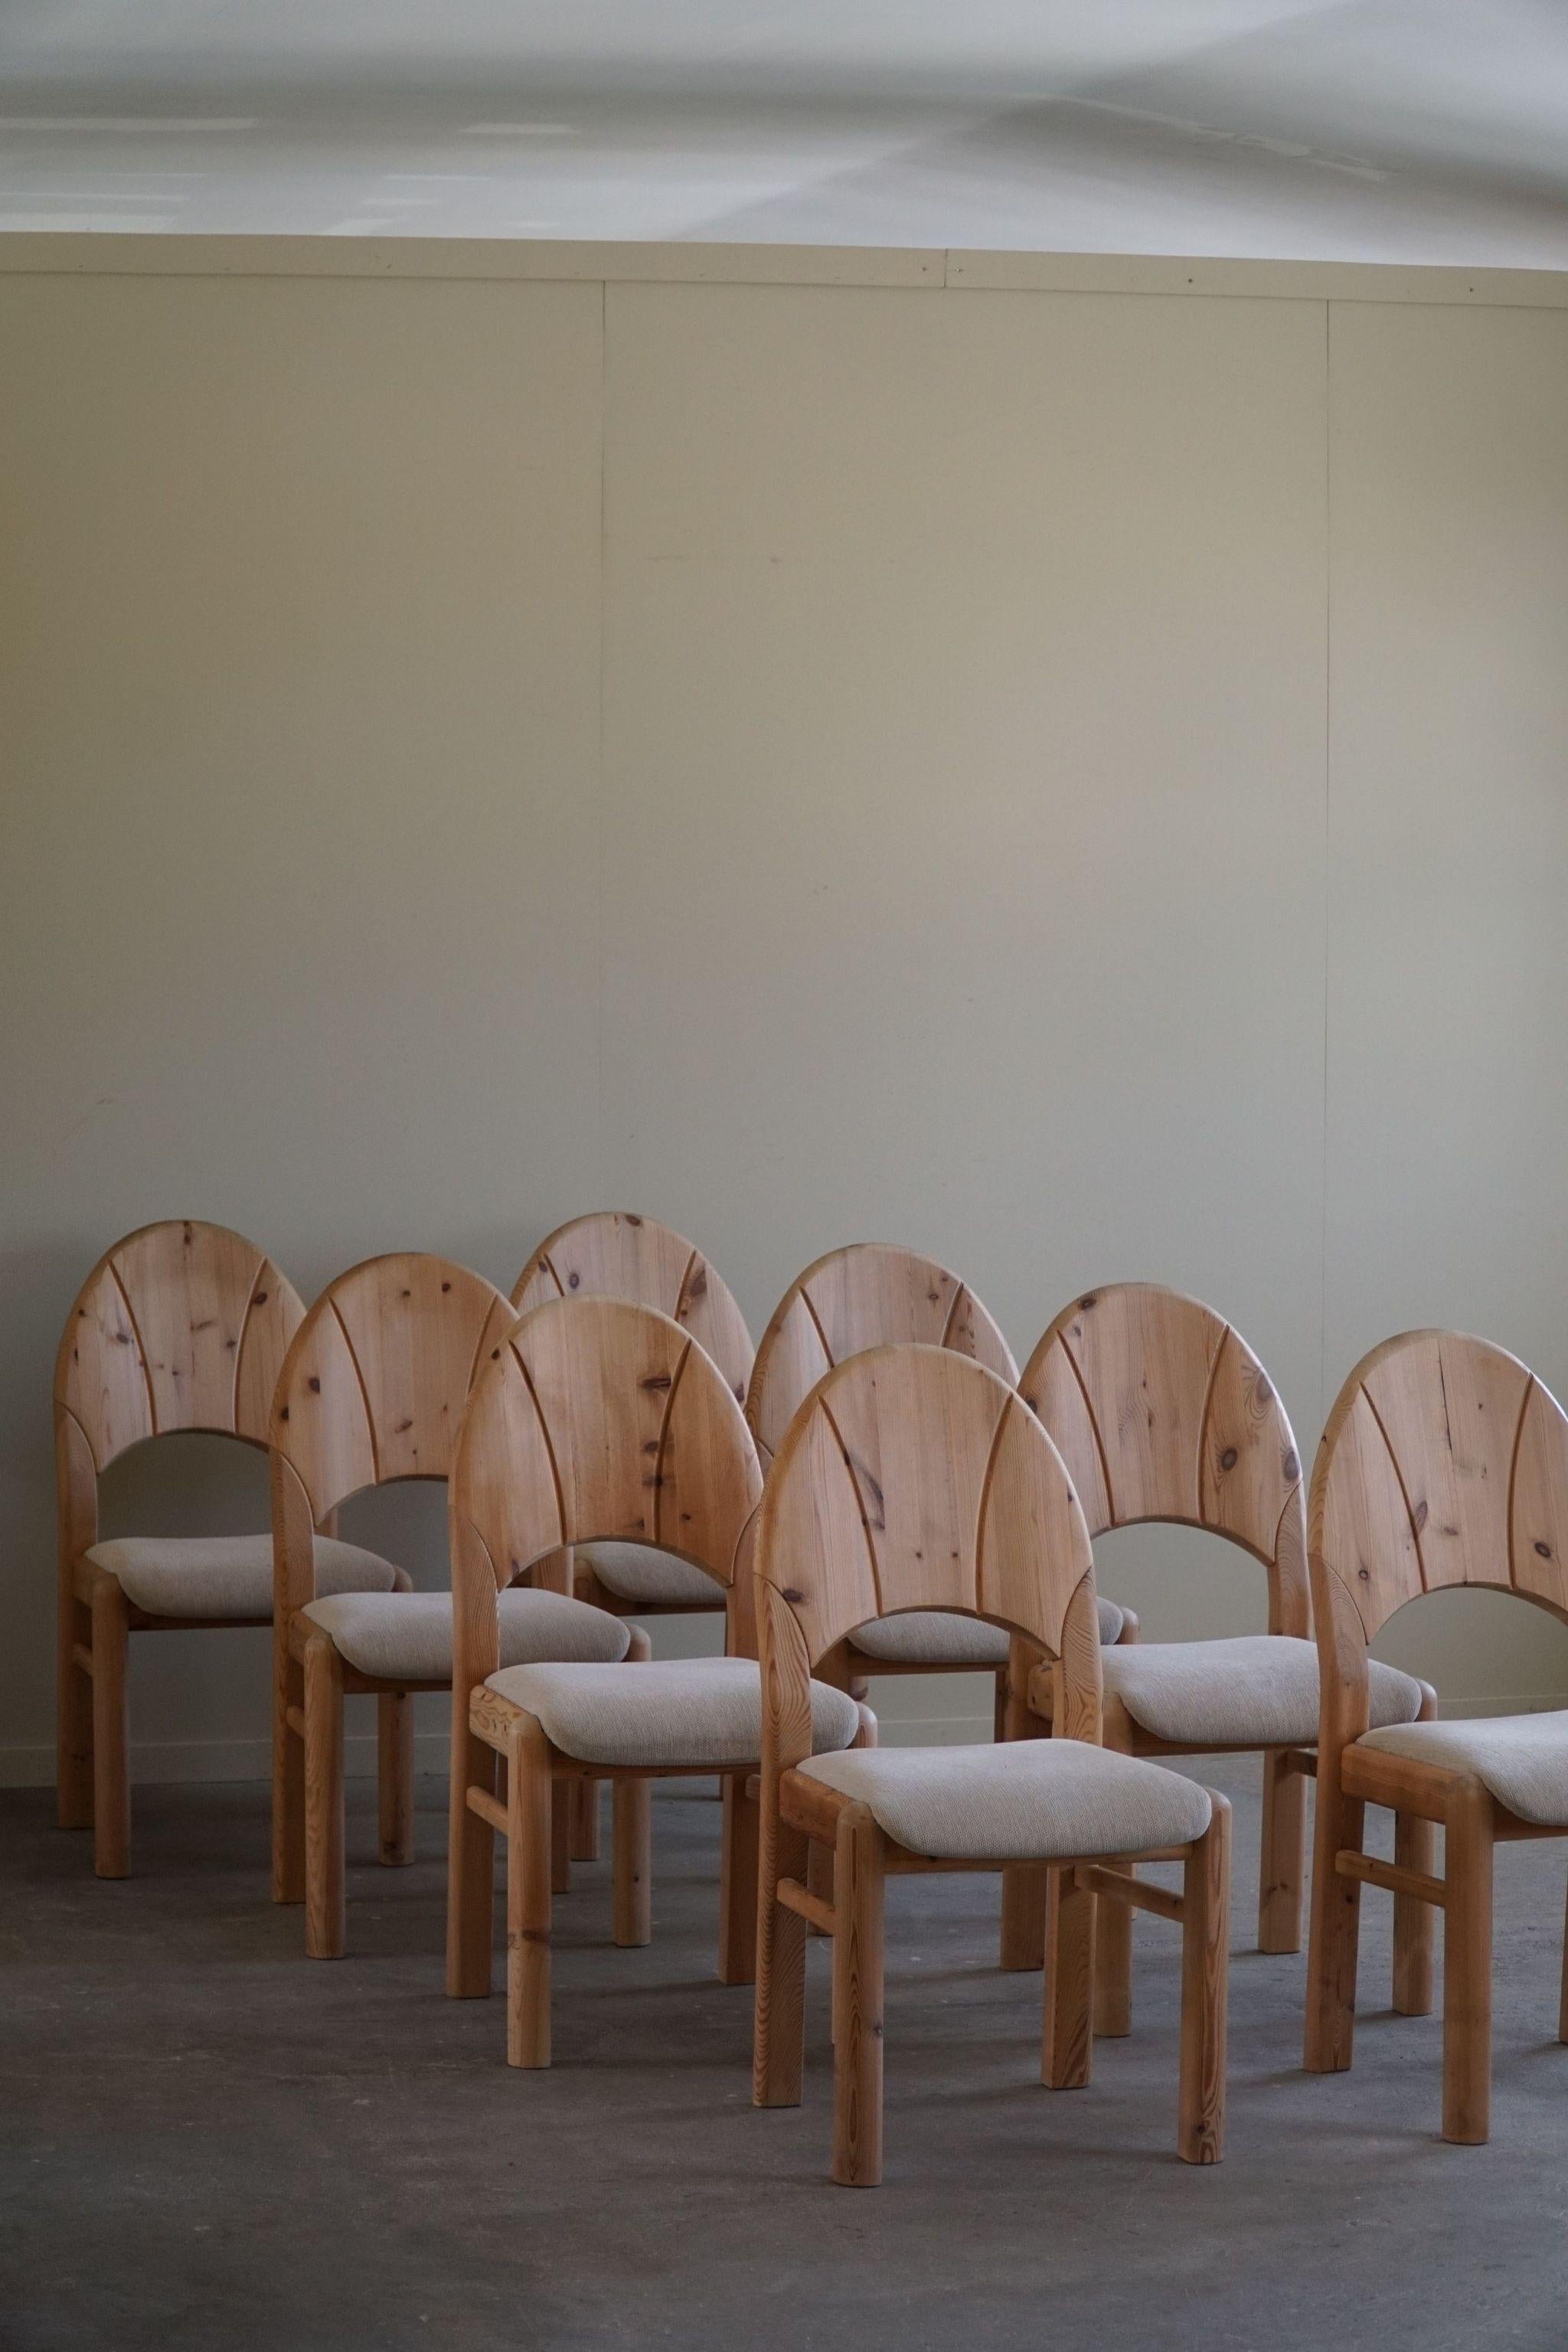 Set of 8 Sculptural Danish Modern Brutalist Chairs in Pine & Wool, 1970s For Sale 4